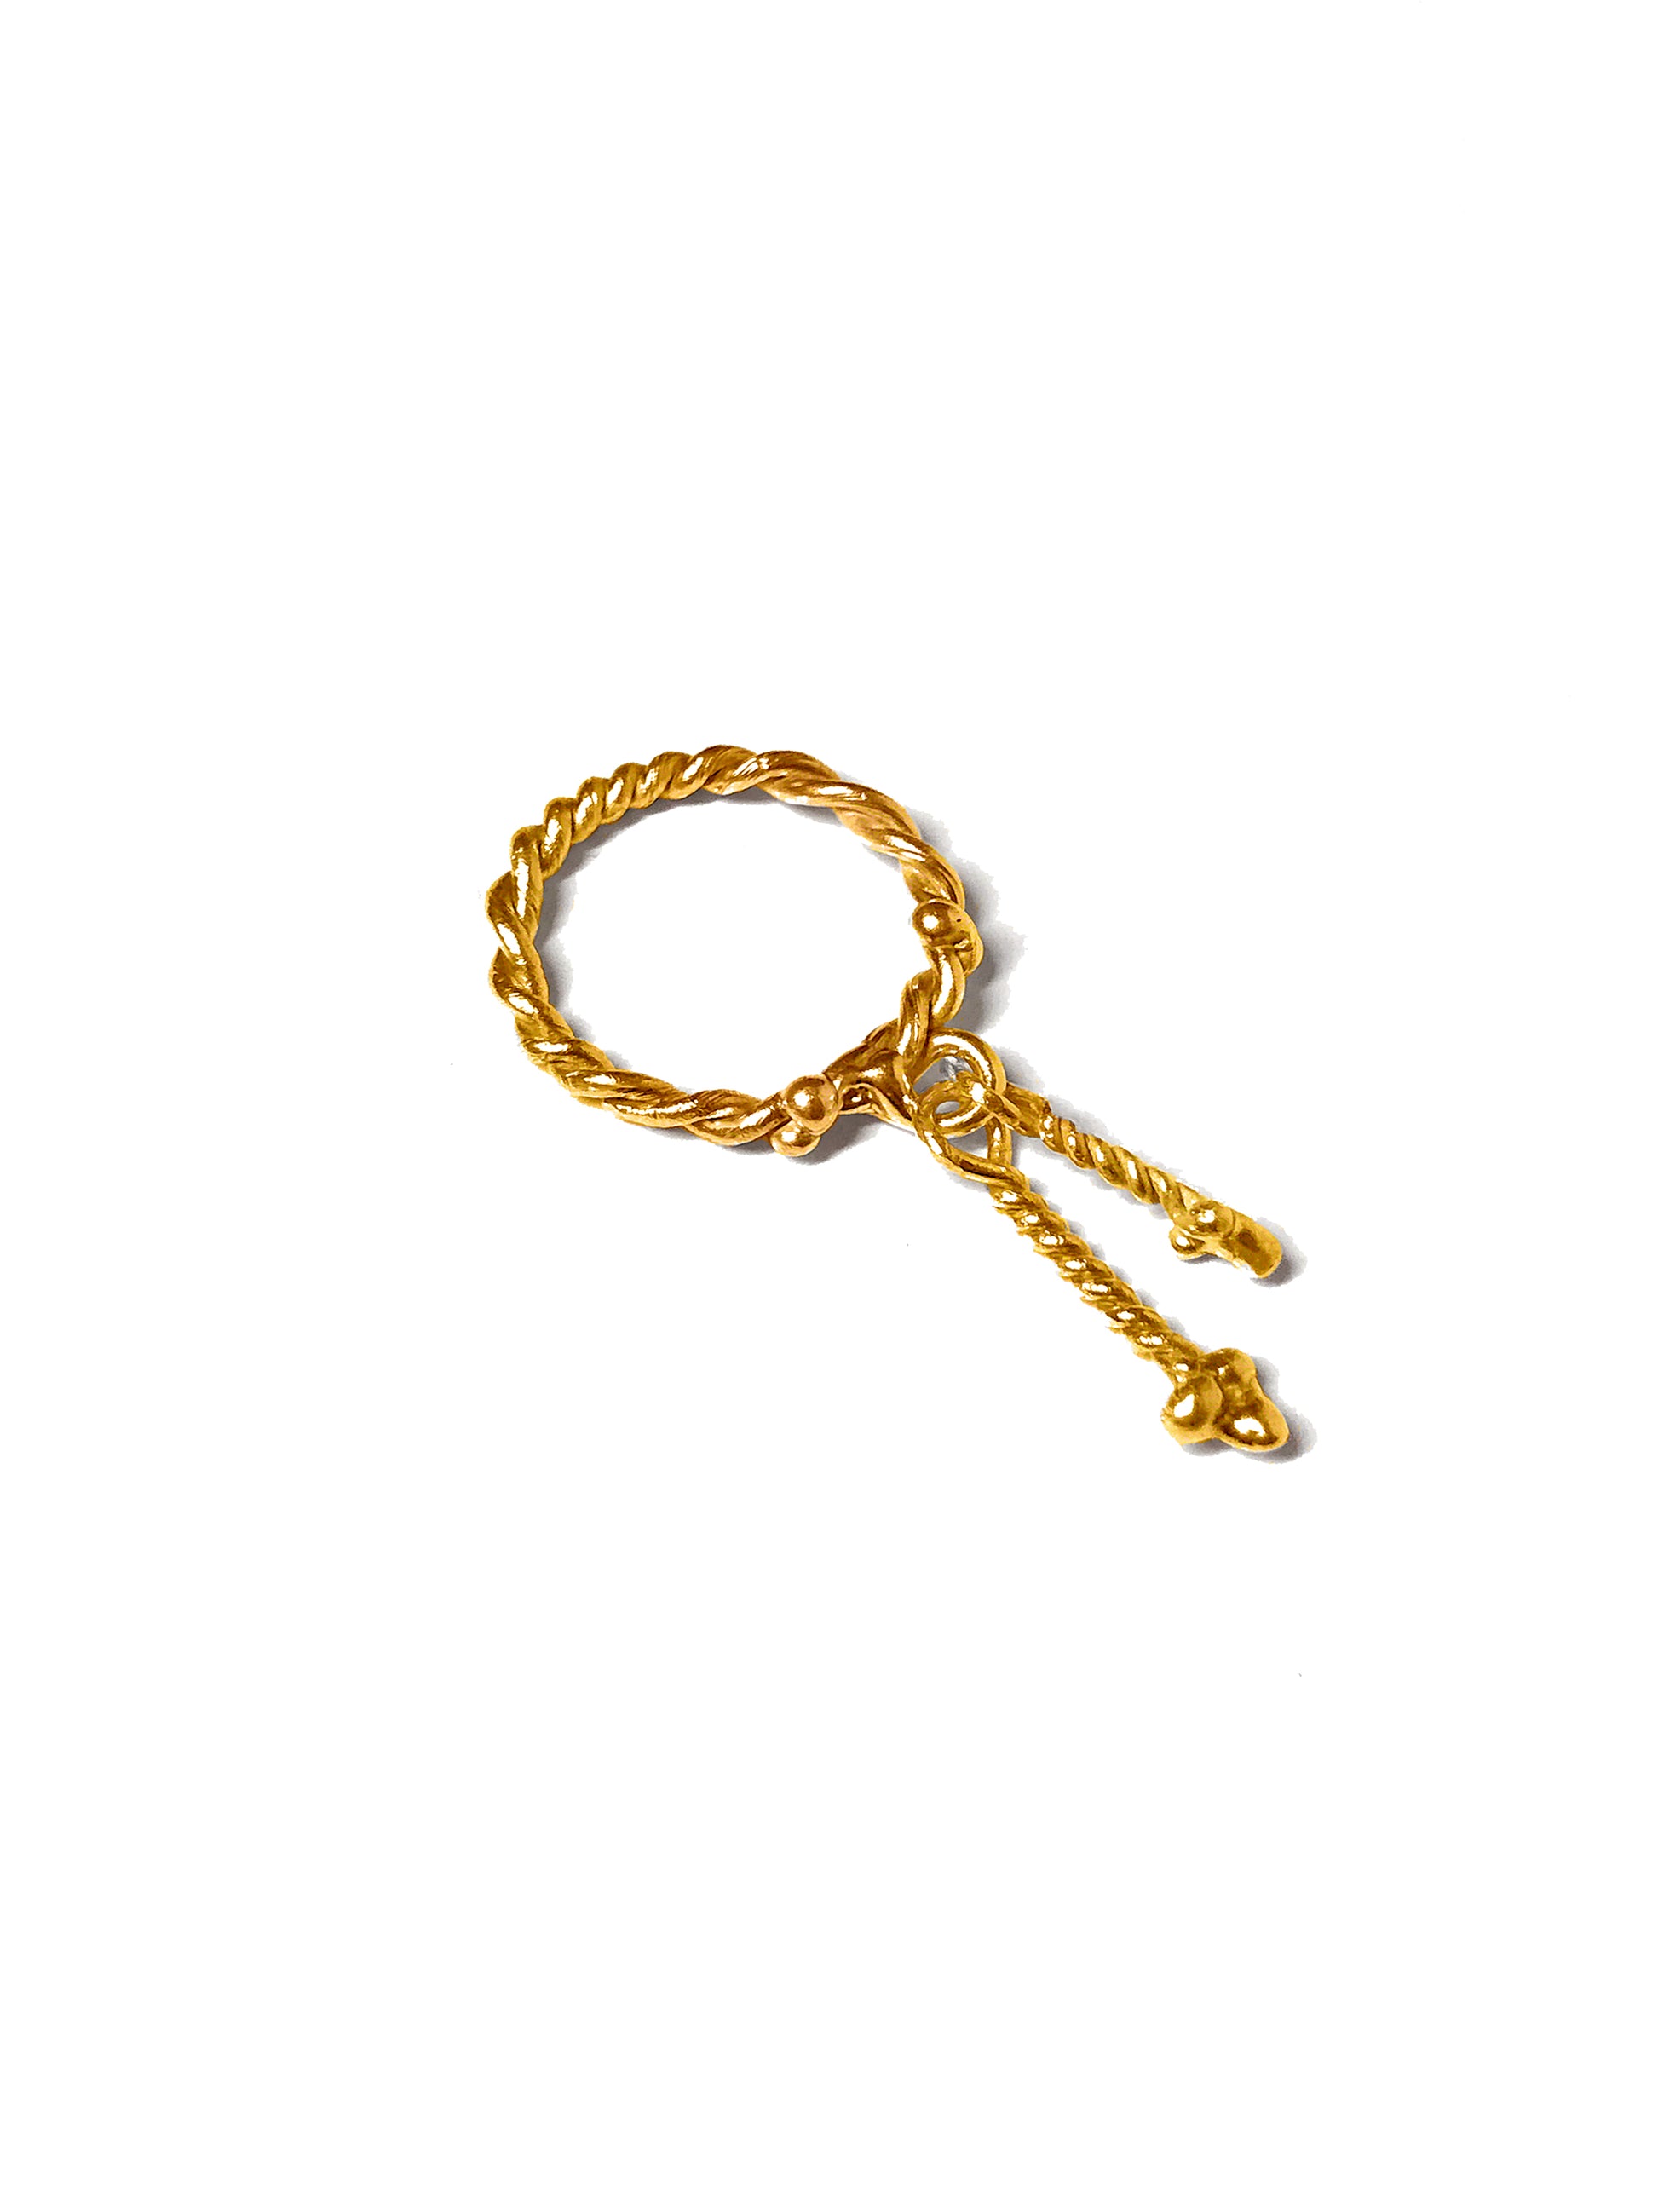 Product photo of Twisted Fates Charm ring in 18K Gold Vermeil laying flat. The unique hand-made details are clear from the two hanging charms to the twisted band. This statement ring is handcraft by an artist in Brooklyn making it a high quality and one-of-a-kind gift. 